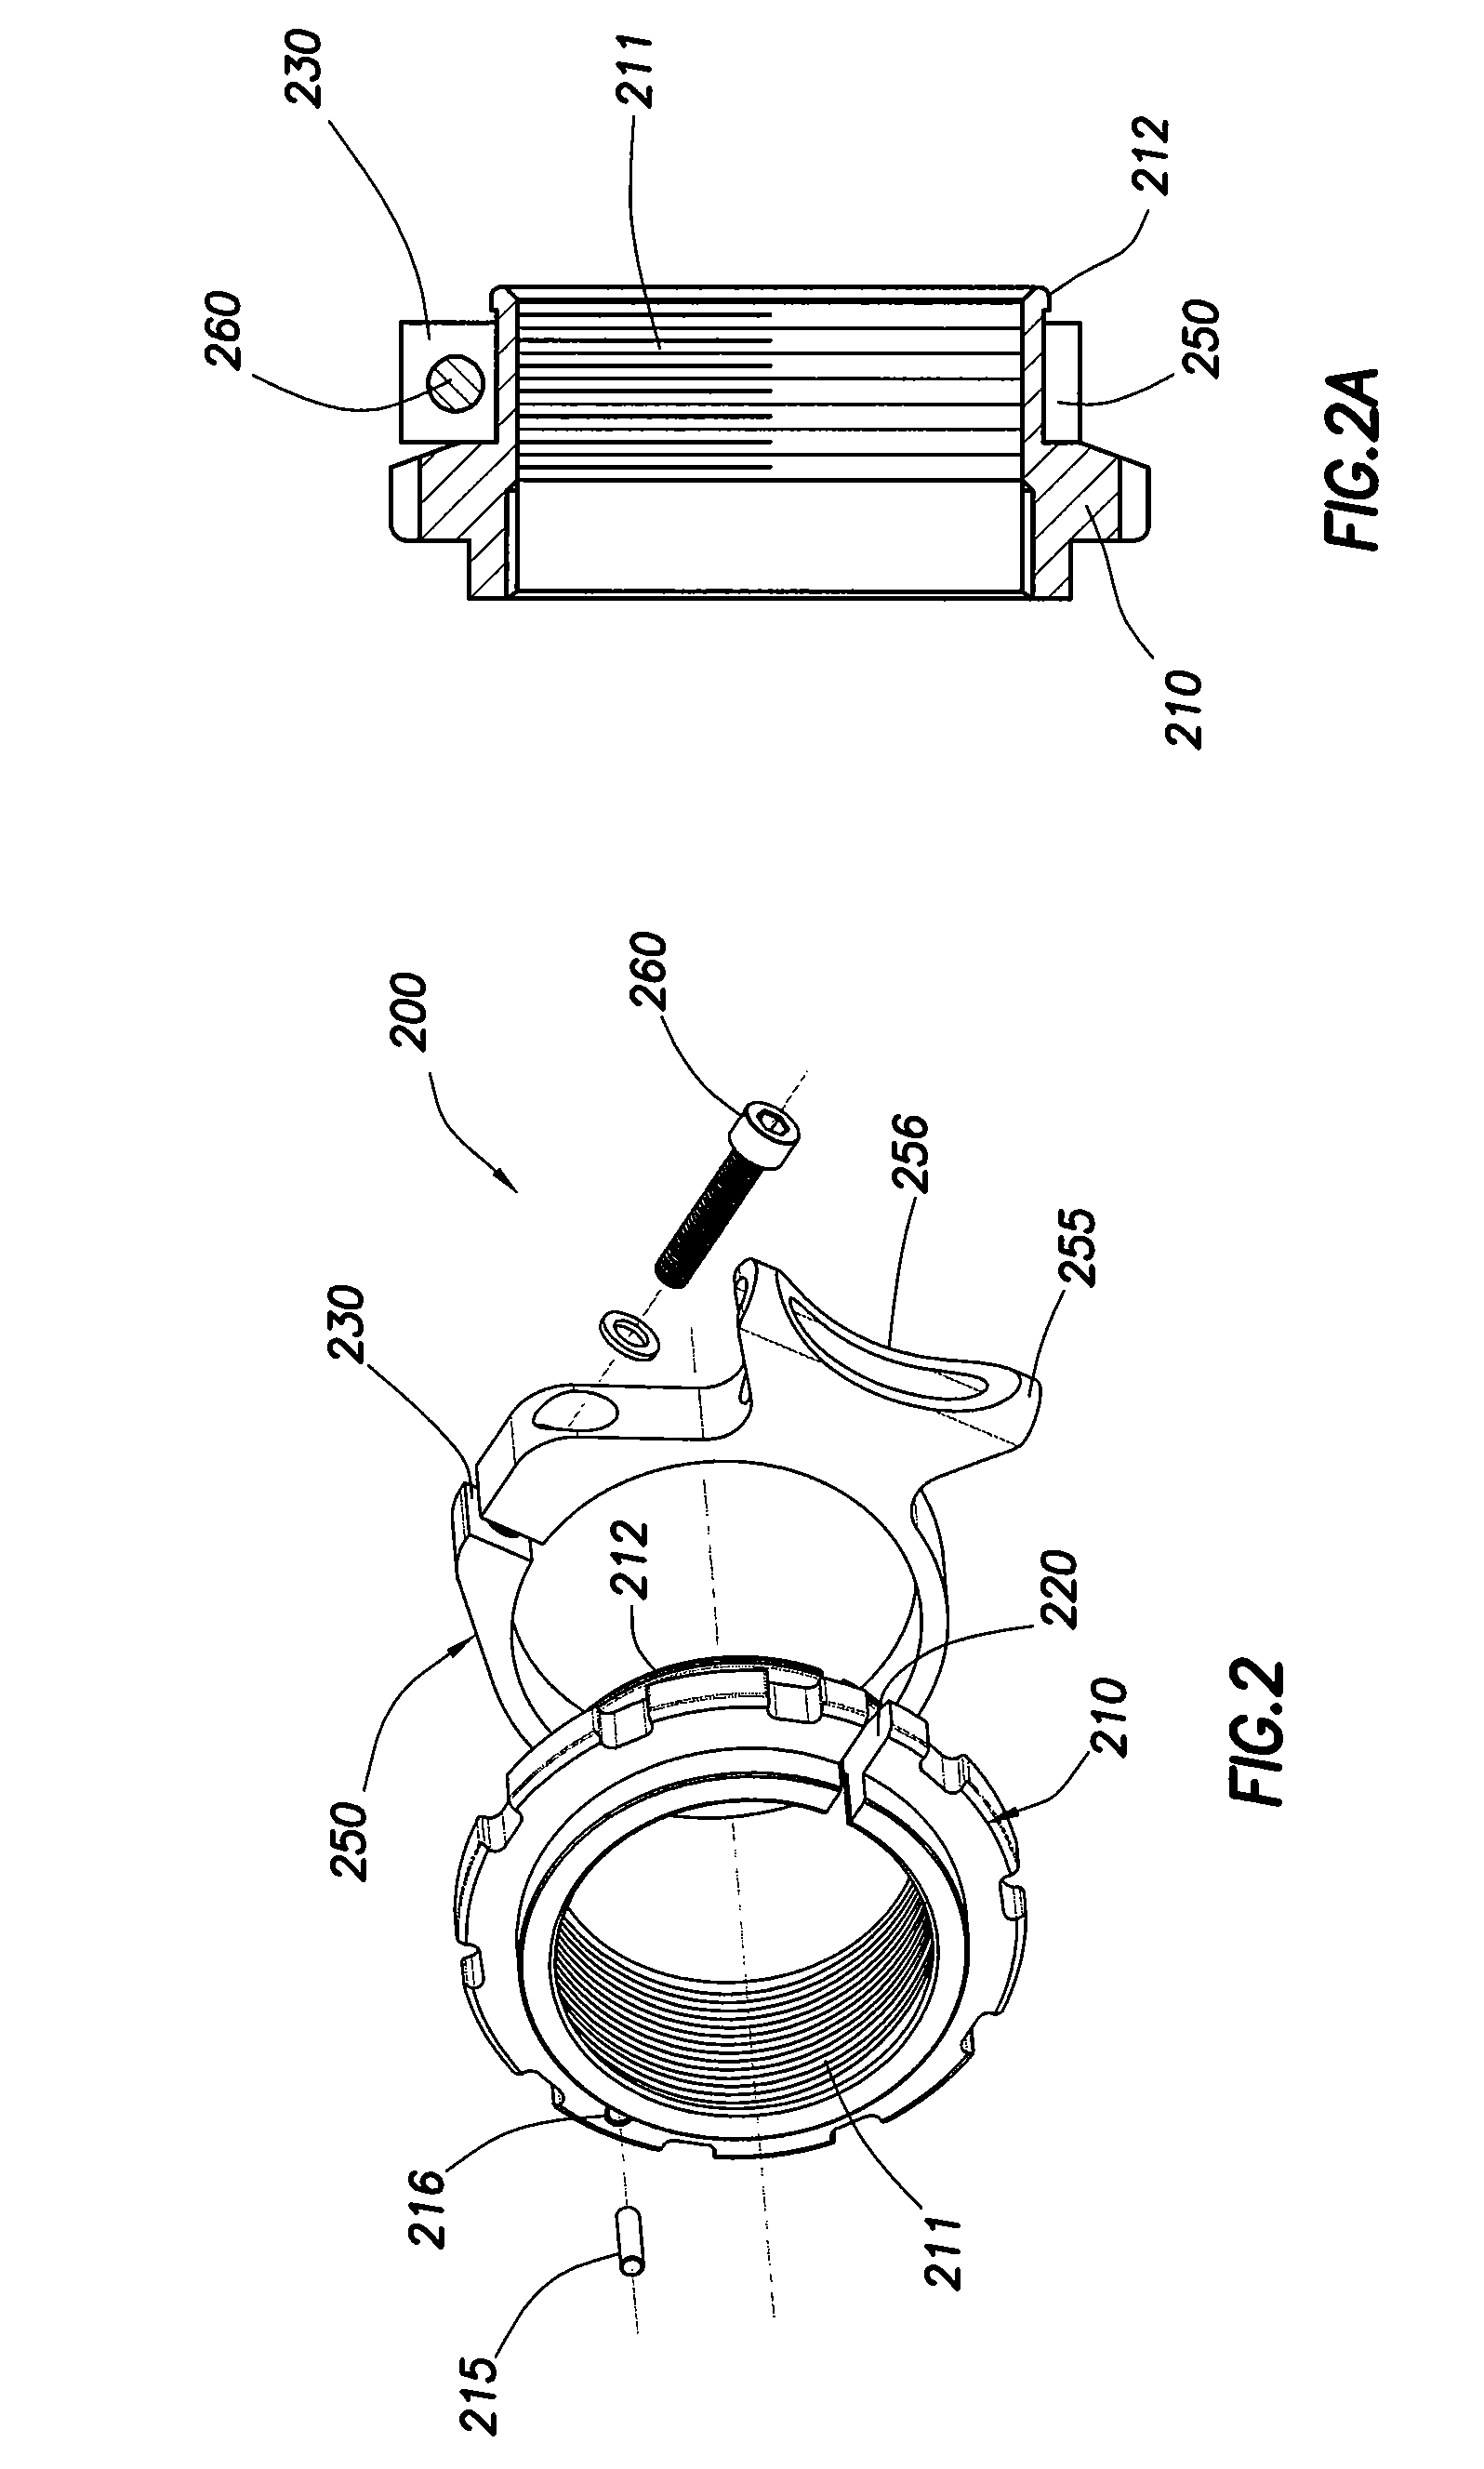 Methods and apparatus for selective spring pre-load adjustment